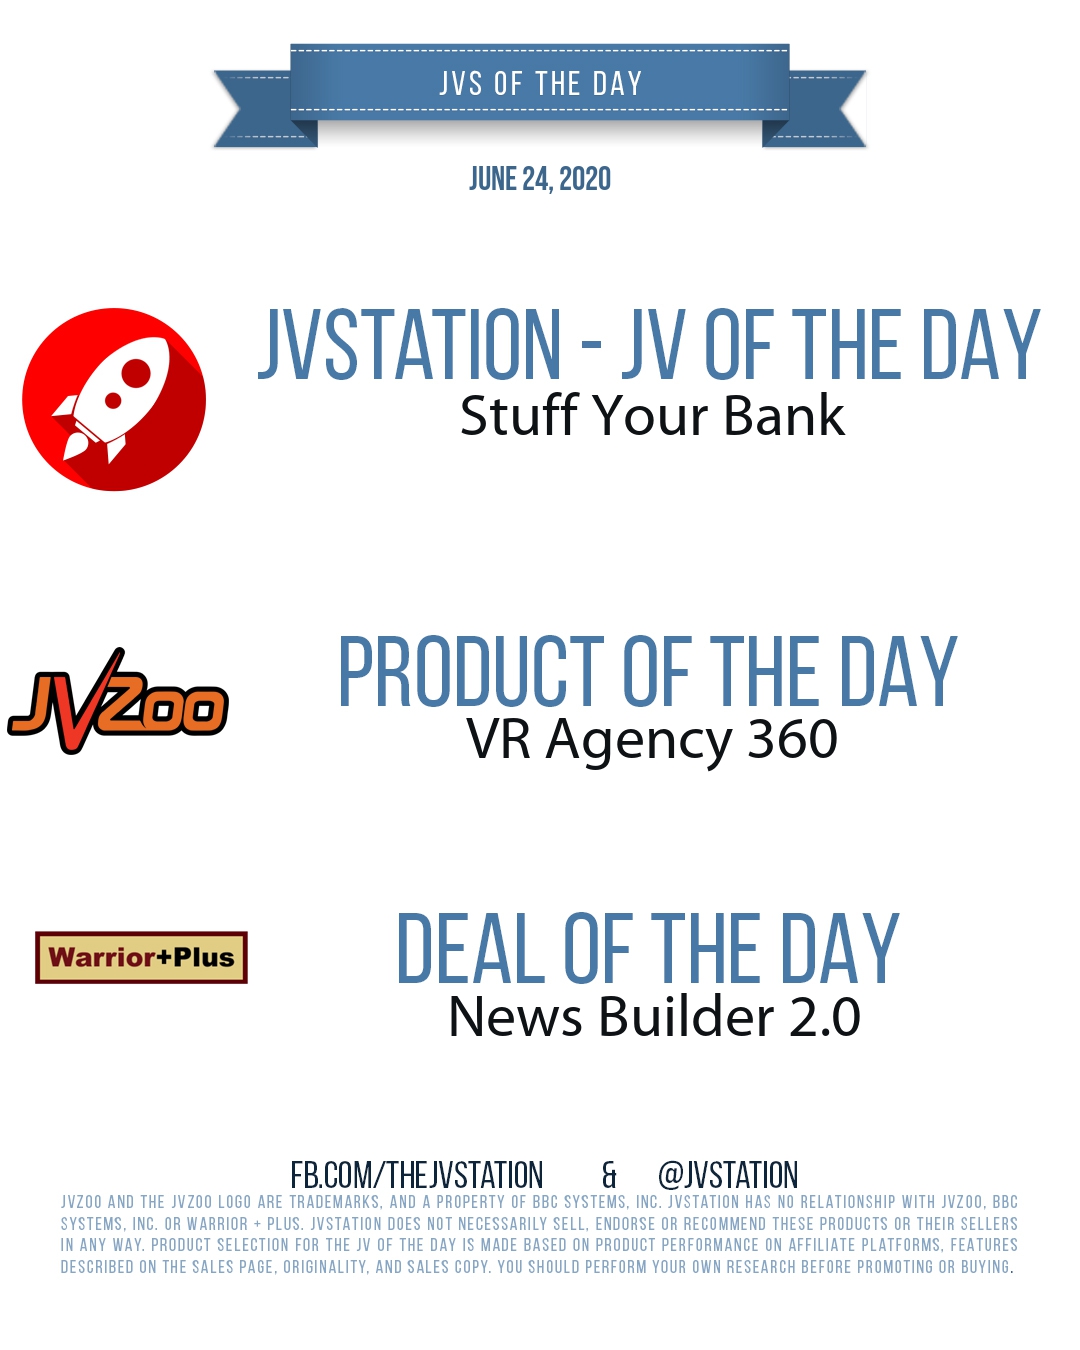 JVs of the day - June 24, 2020